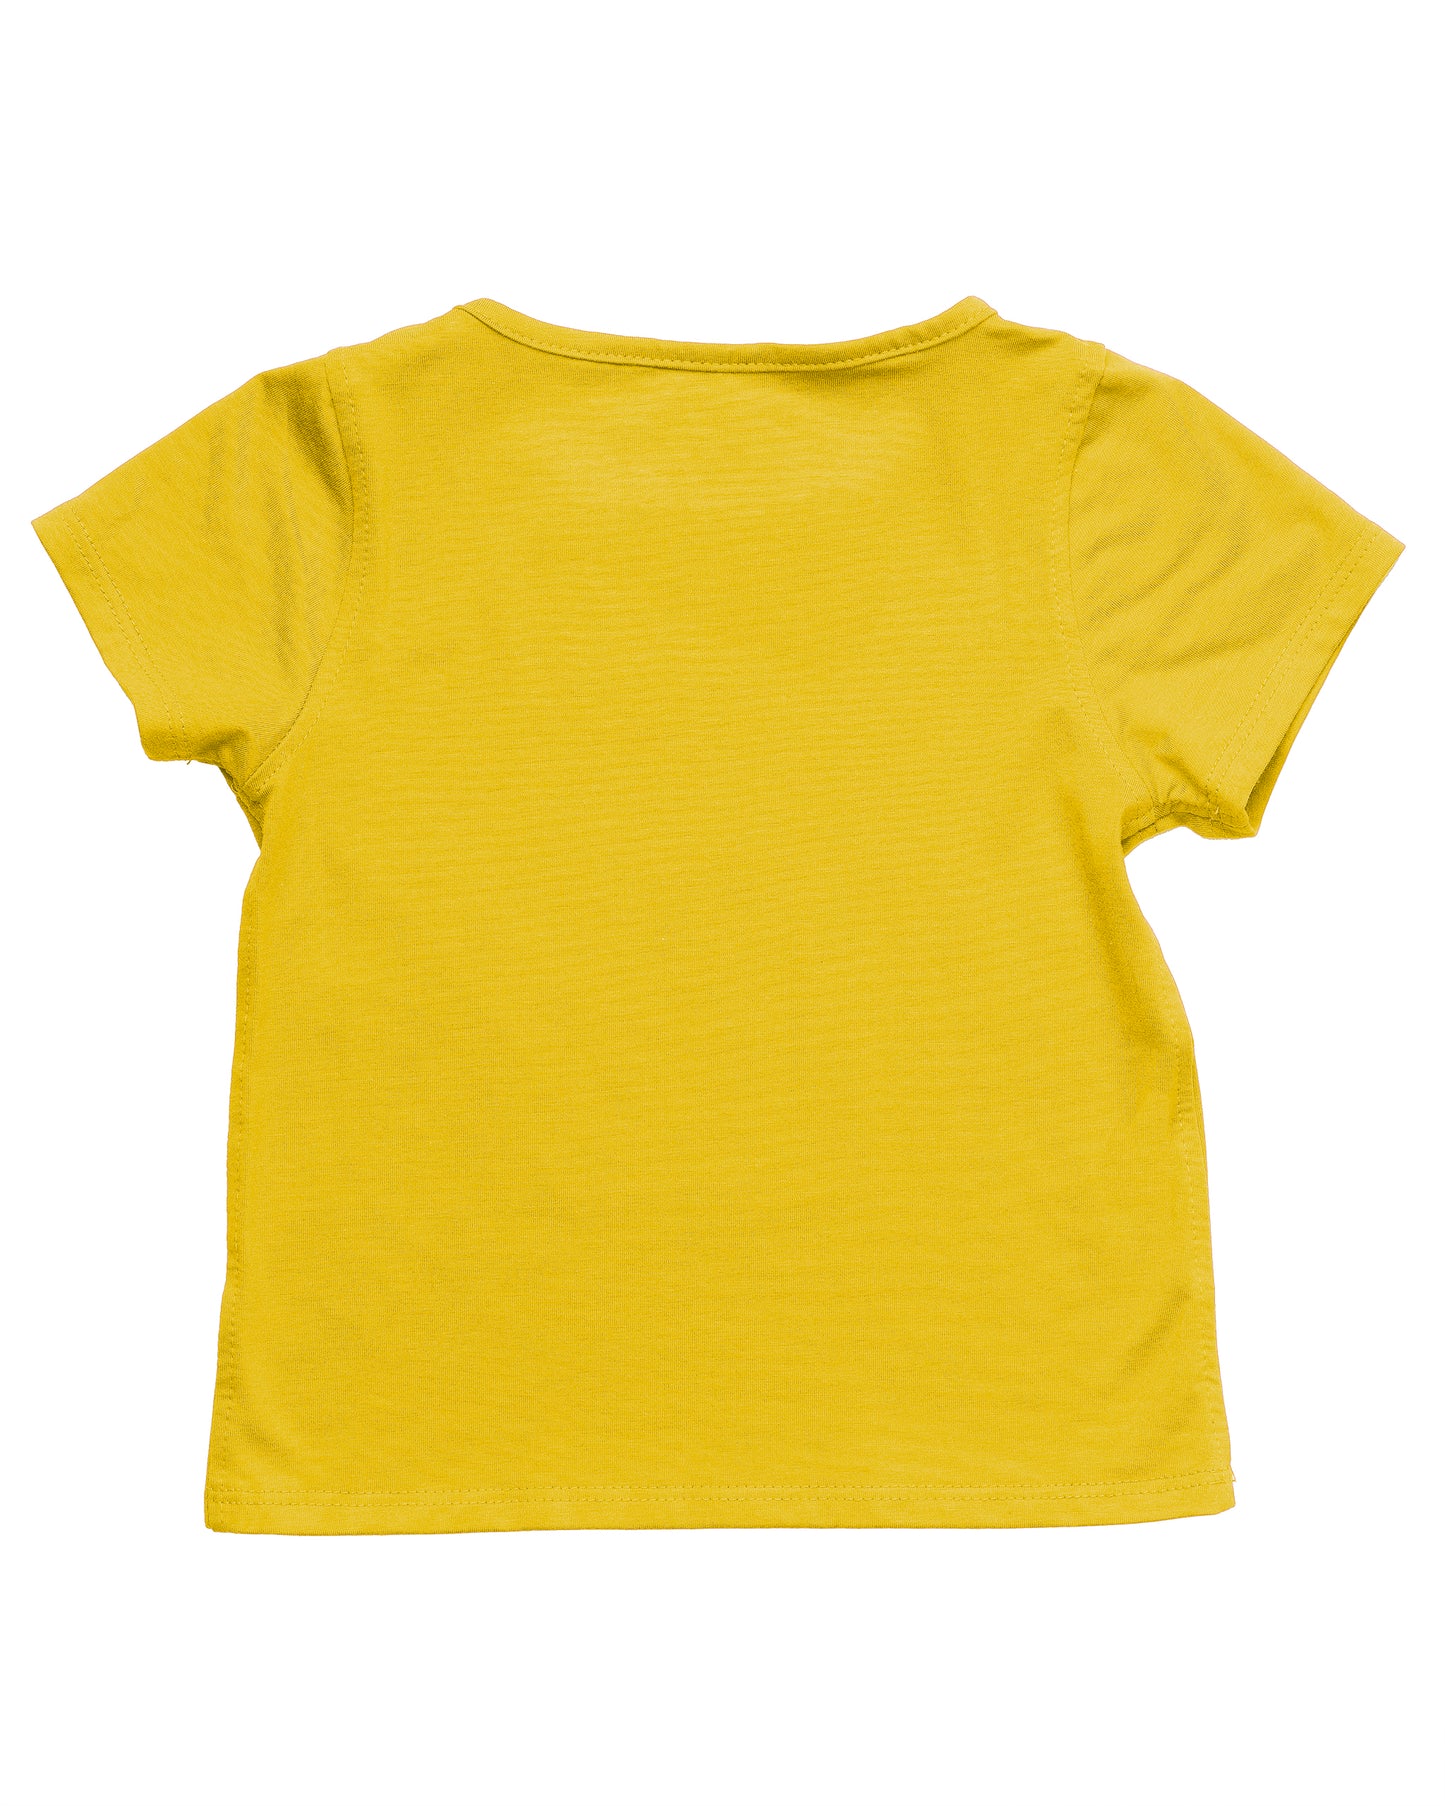 The Everyday Graphic Tee: Pac Man